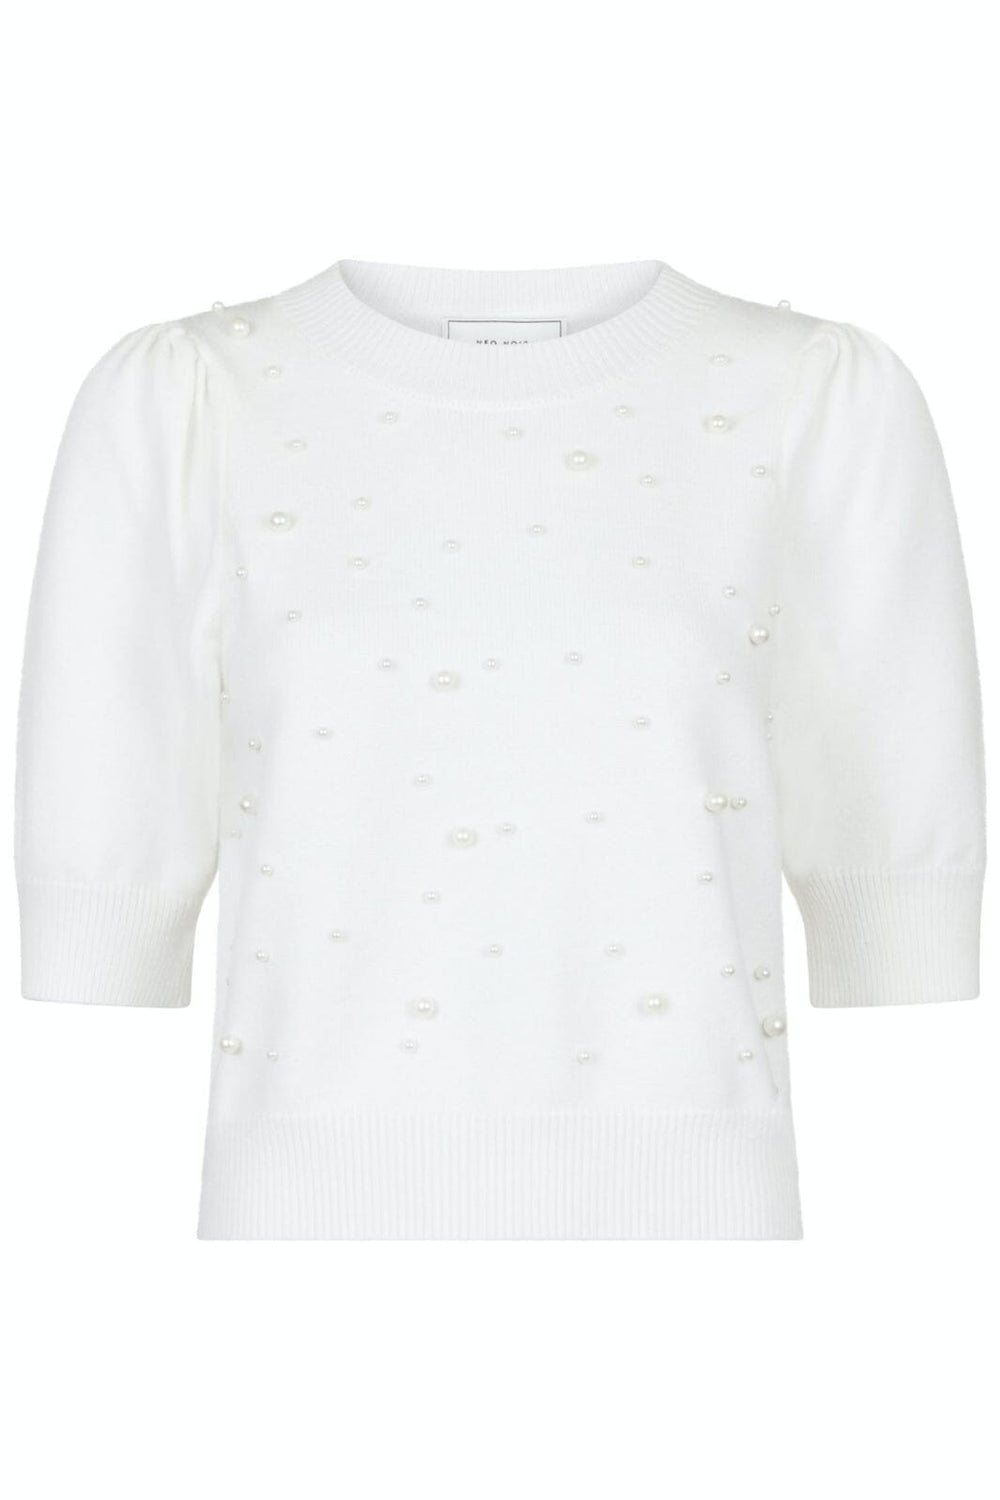 Neo Noir - Maia Soft Pearl Knit Tee - Off White T-shirts 